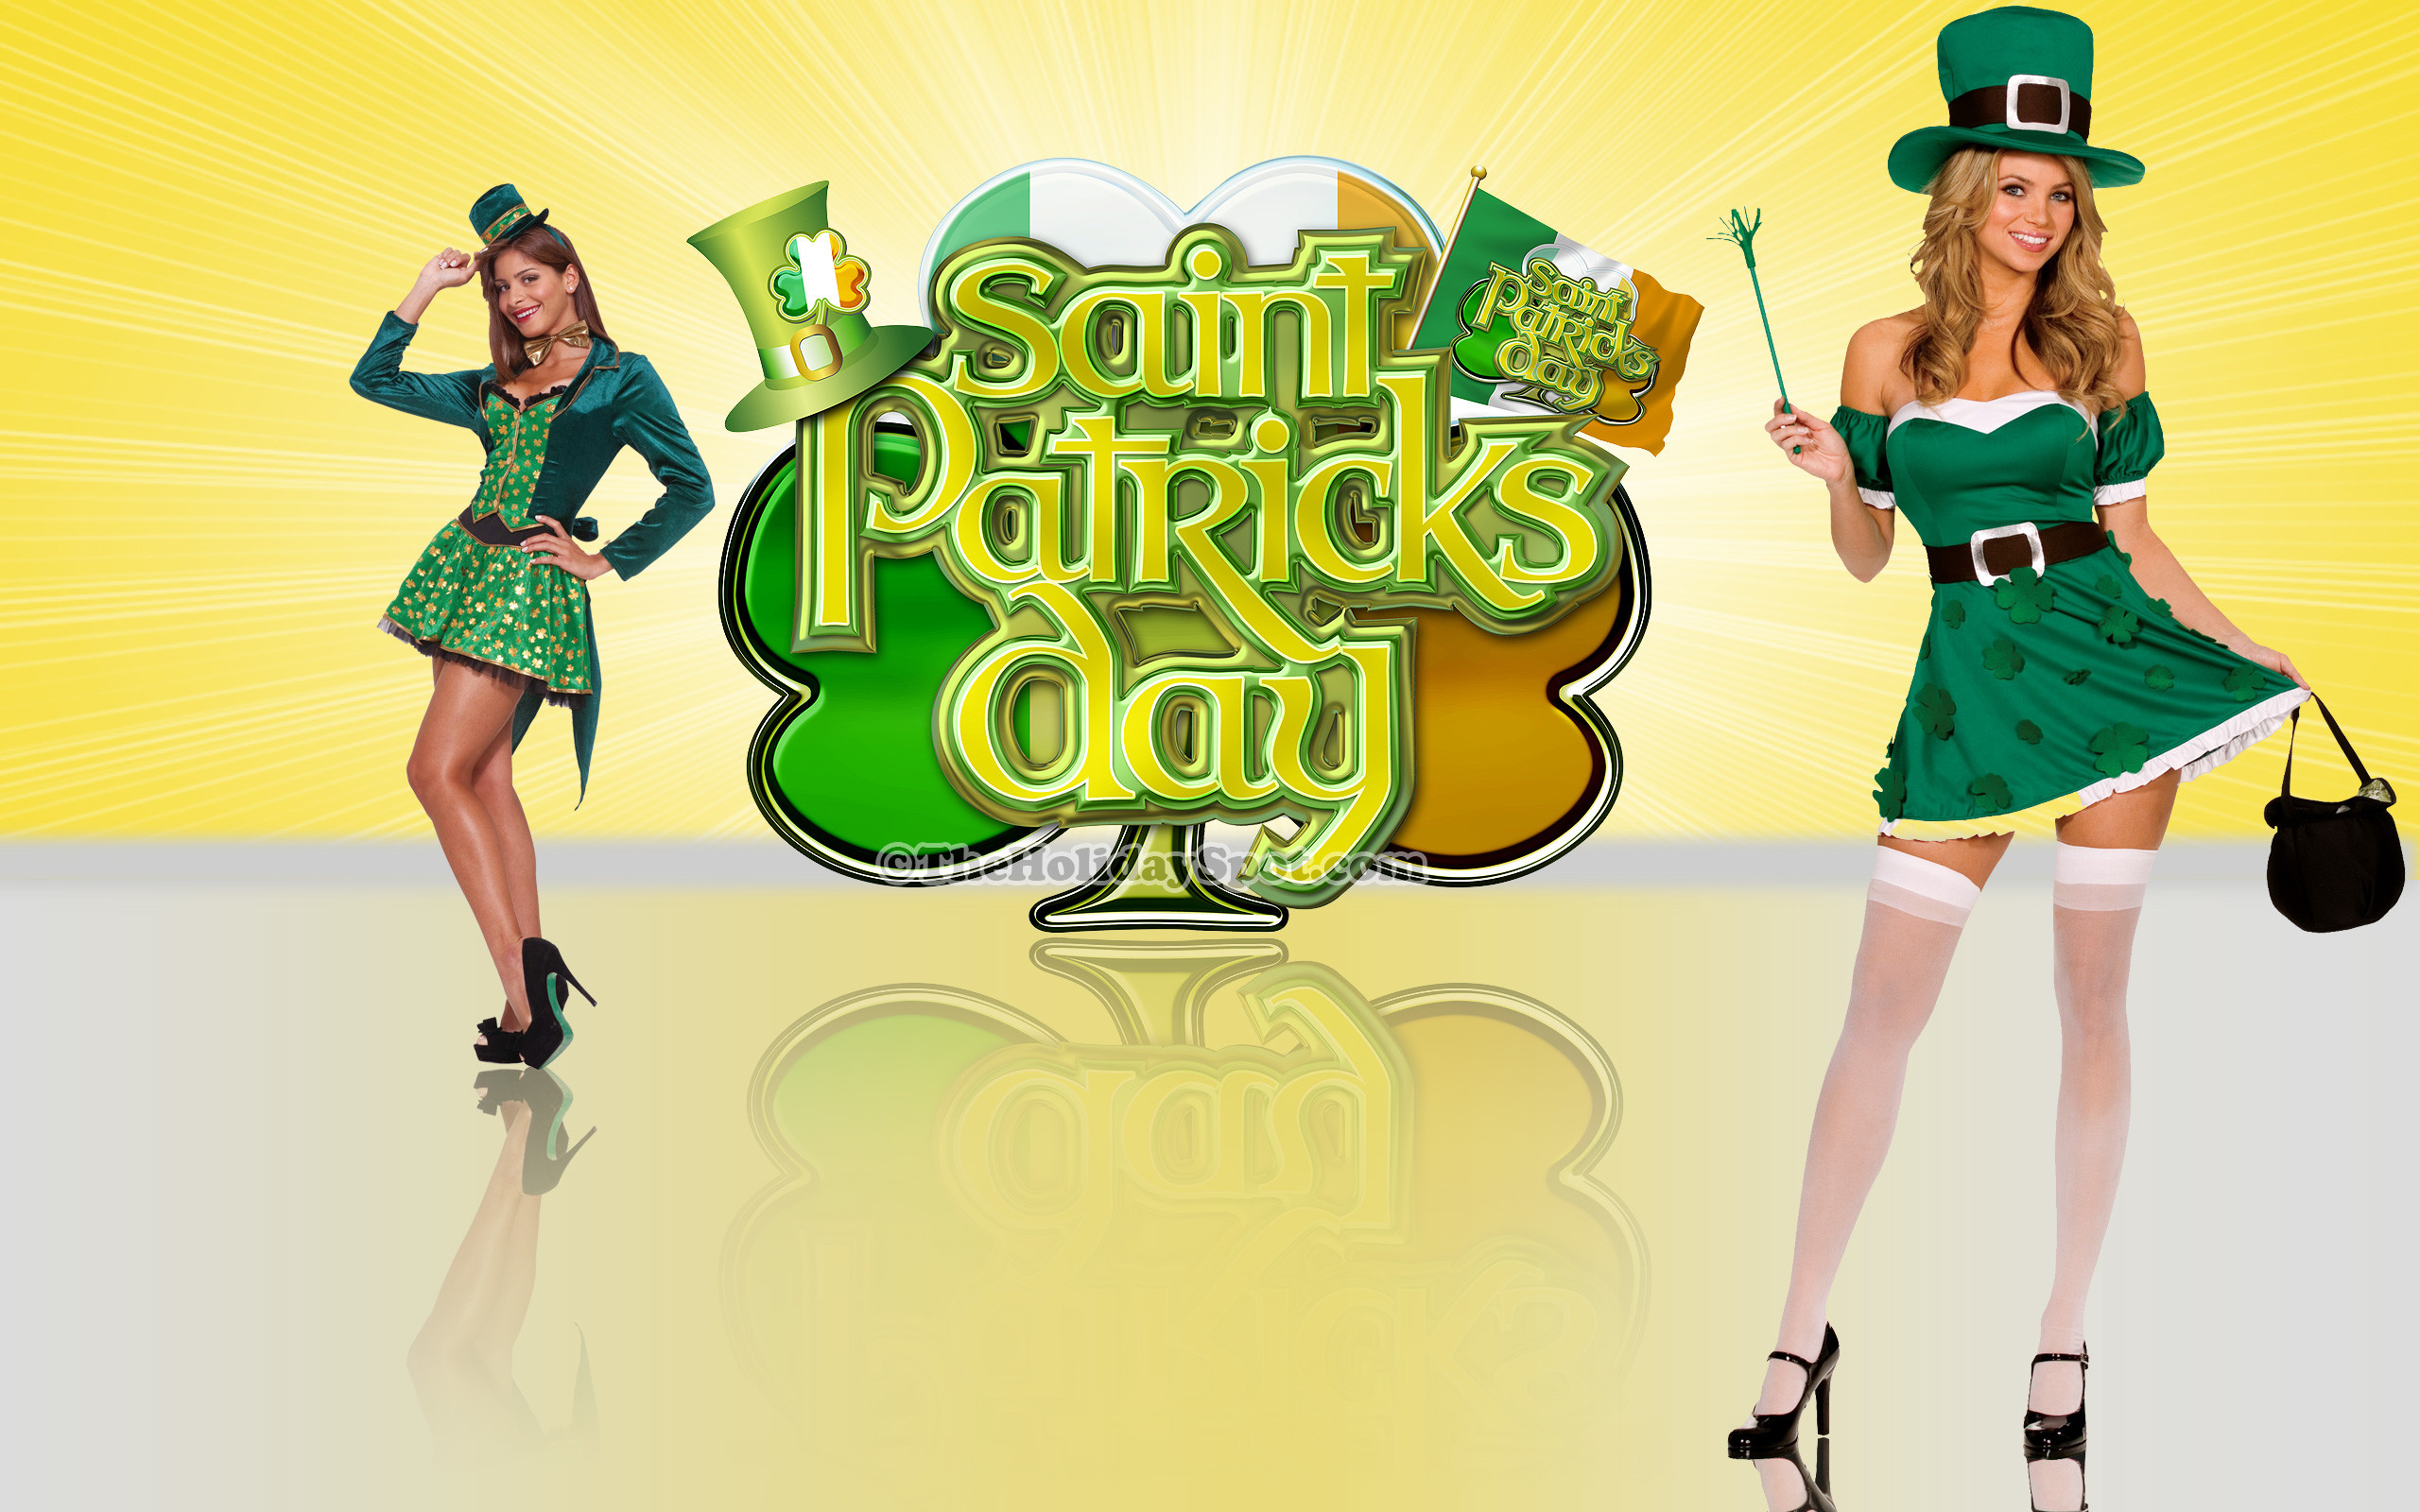 2560x1600 A high quality wallpaper featuring two girls in Patrick's Day costume.